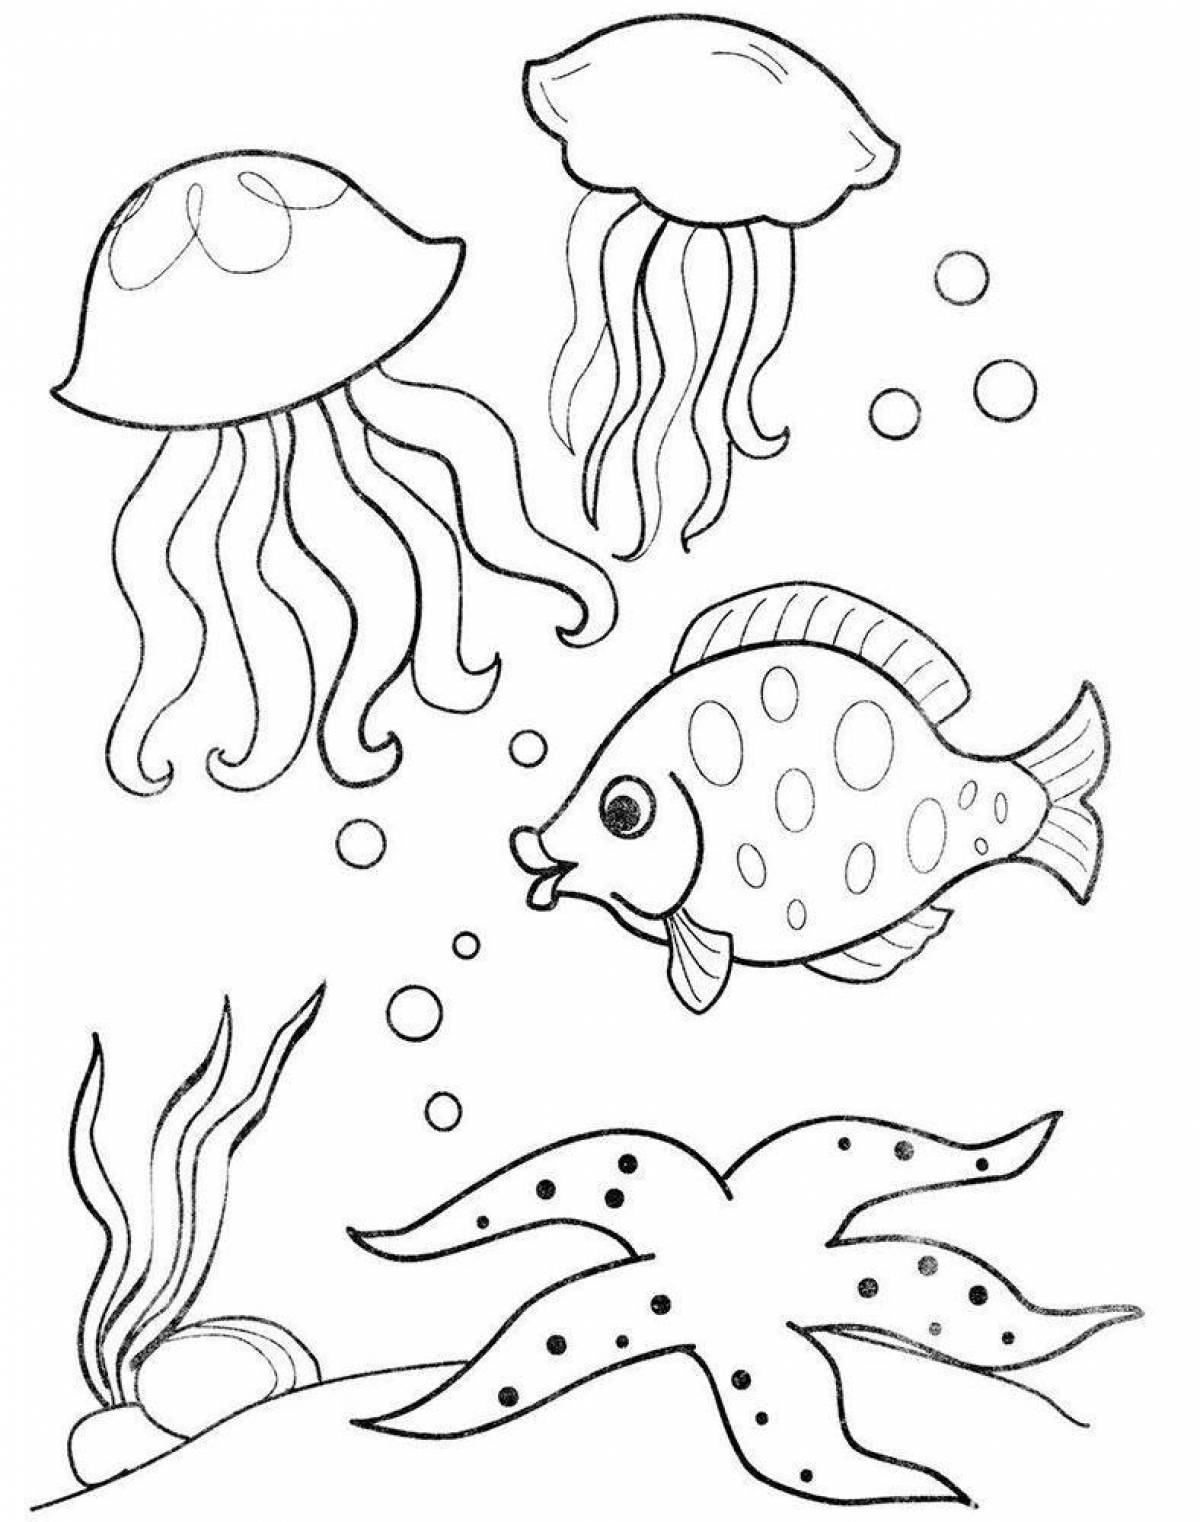 Colourful coloring of the underwater world for children